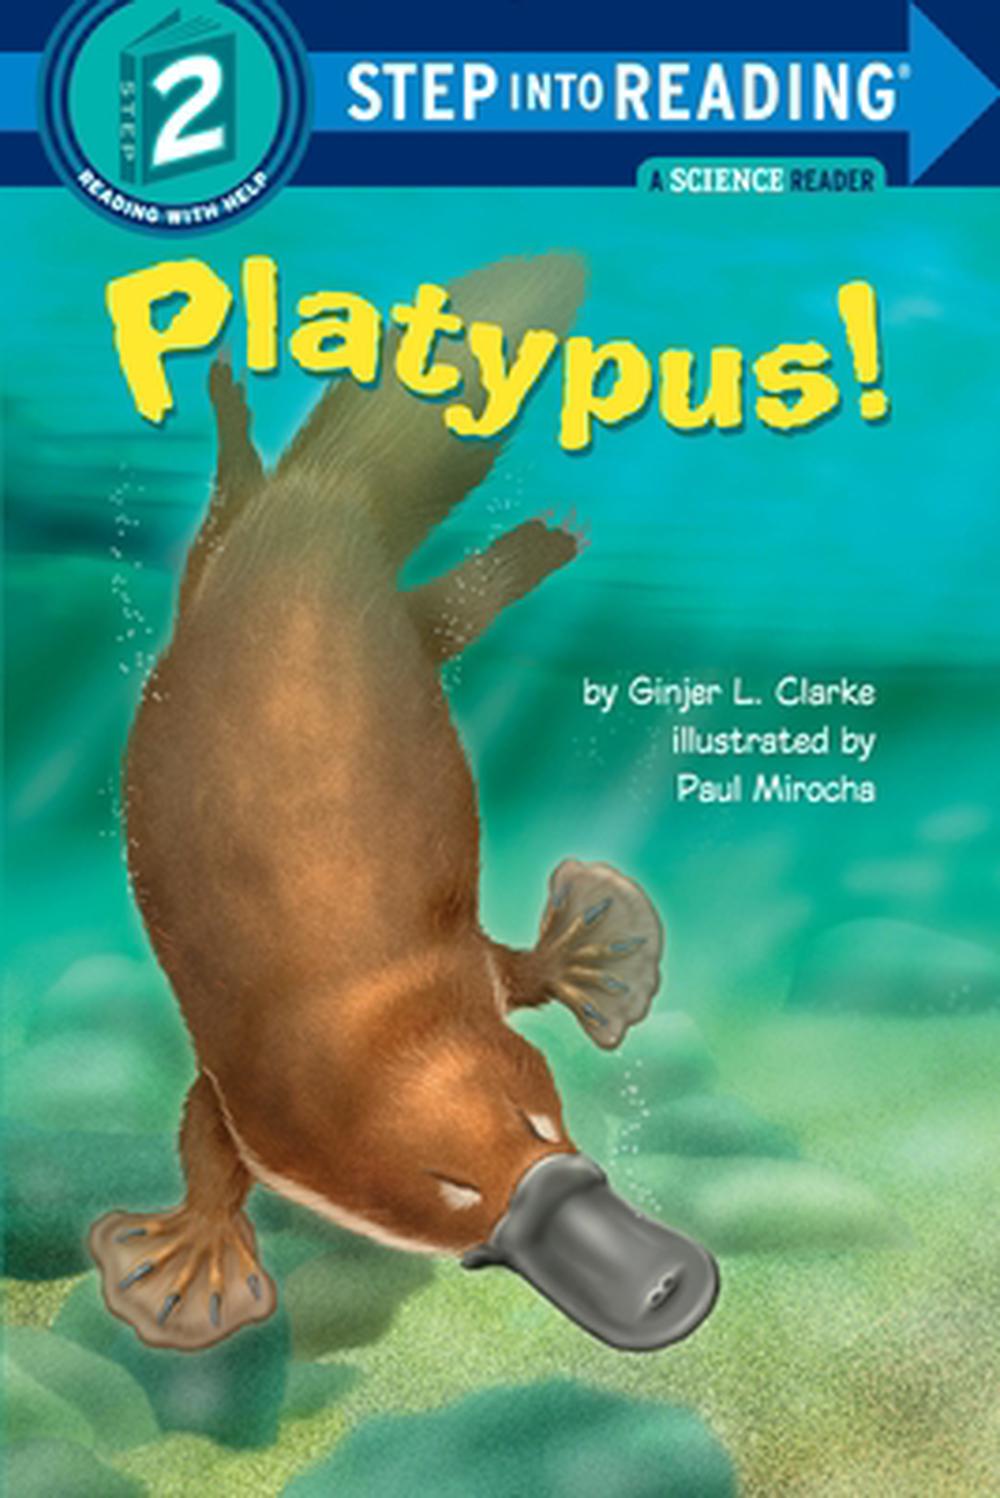 platypus facts book